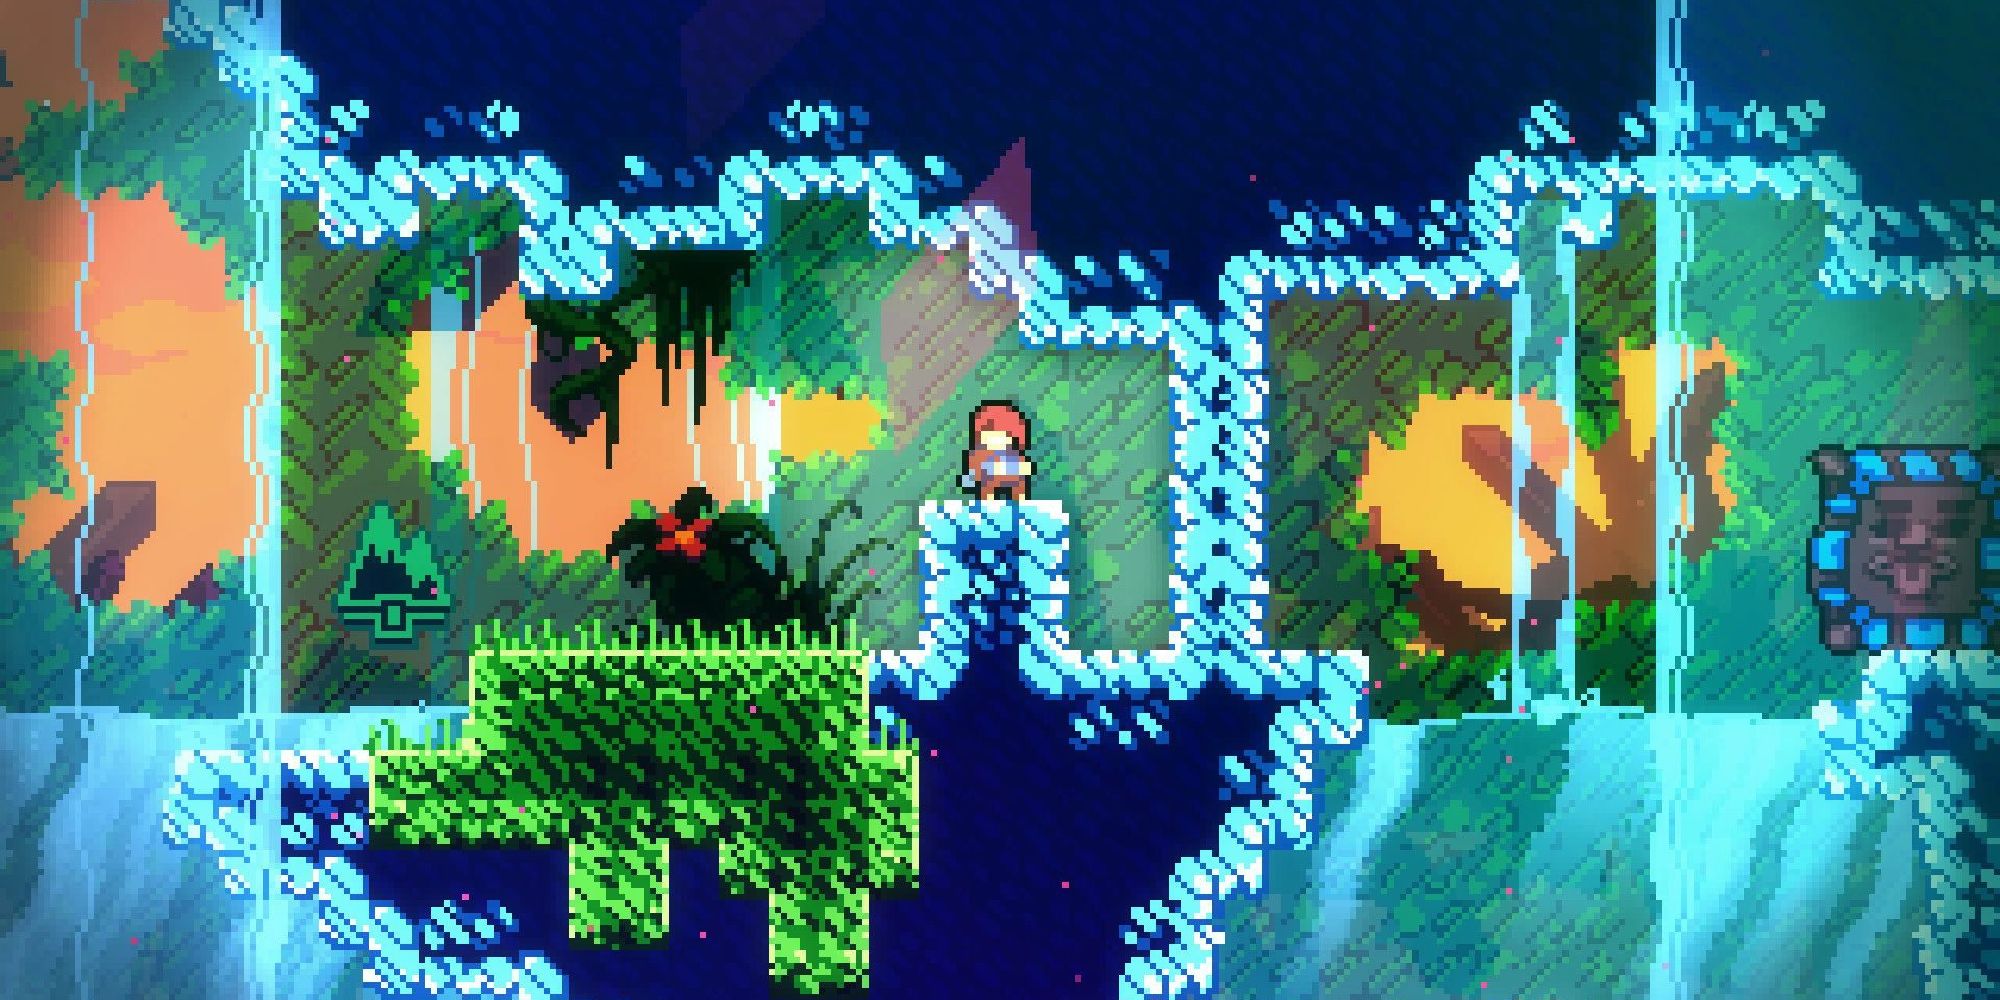 A screenshot from Celeste, showing Madeline standing among waterfalls